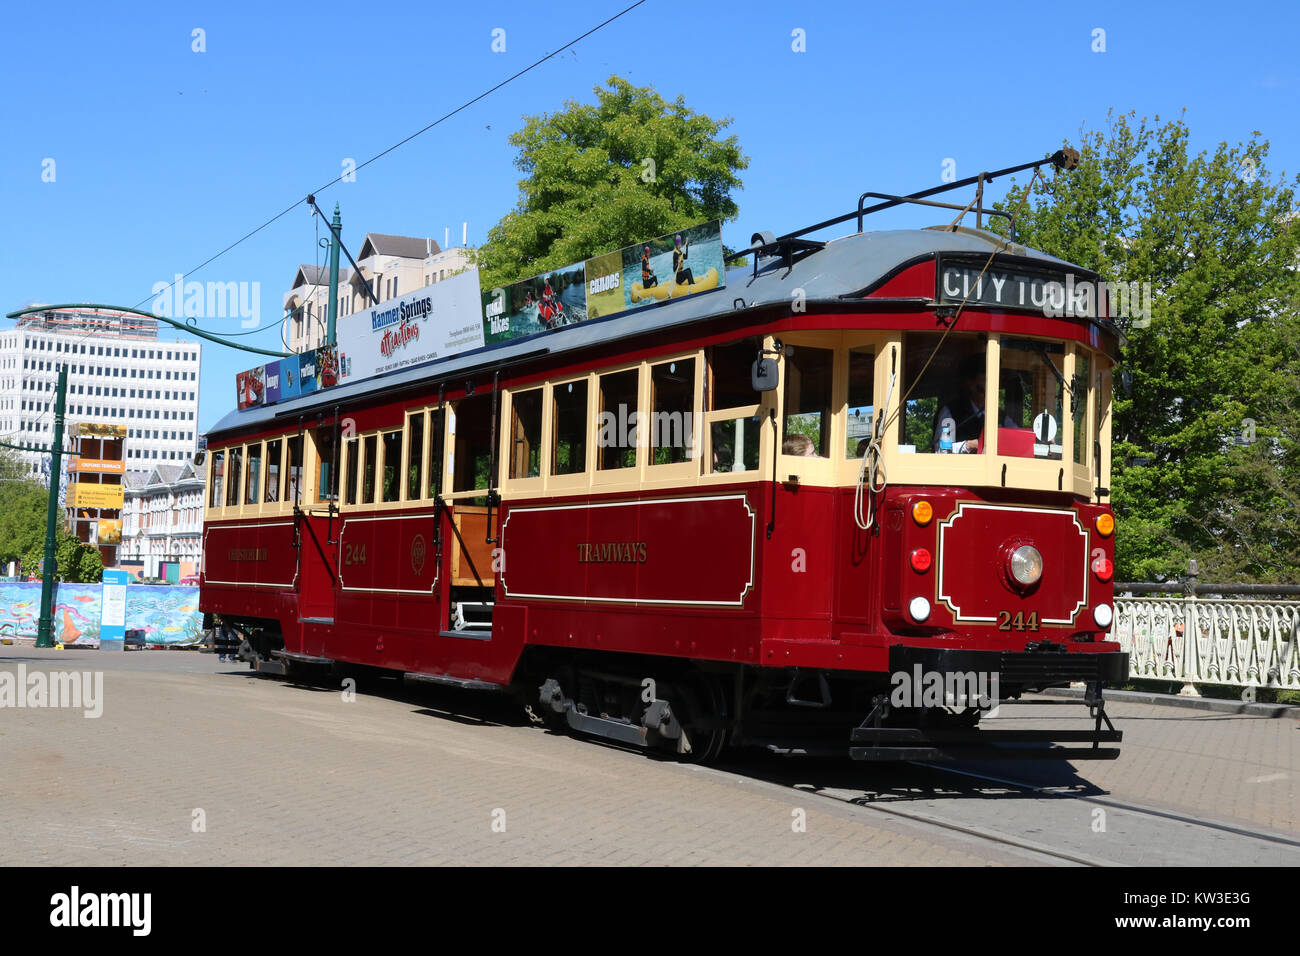 Christchurch Tramways Tram 244 on Worcester Boulevard, Christchurch, New Zealand on a city tour on the bridge over the Avon River. Stock Photo